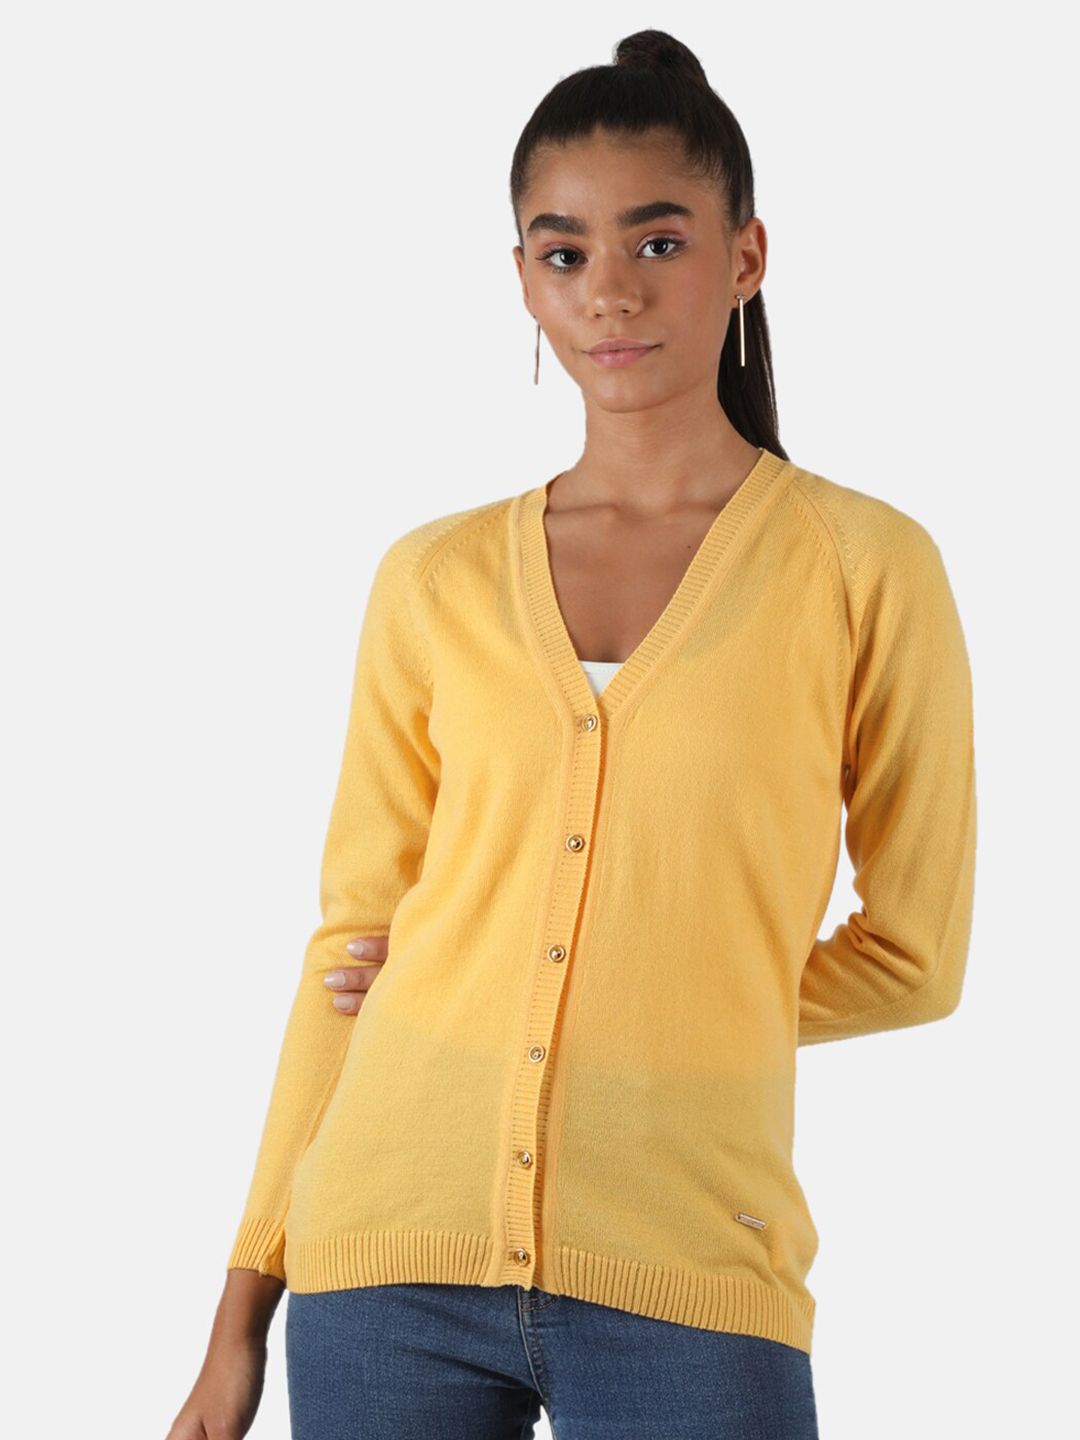 Monte Carlo Women's Blend Wool Yellow Solid V Neck Cardigan Price in India